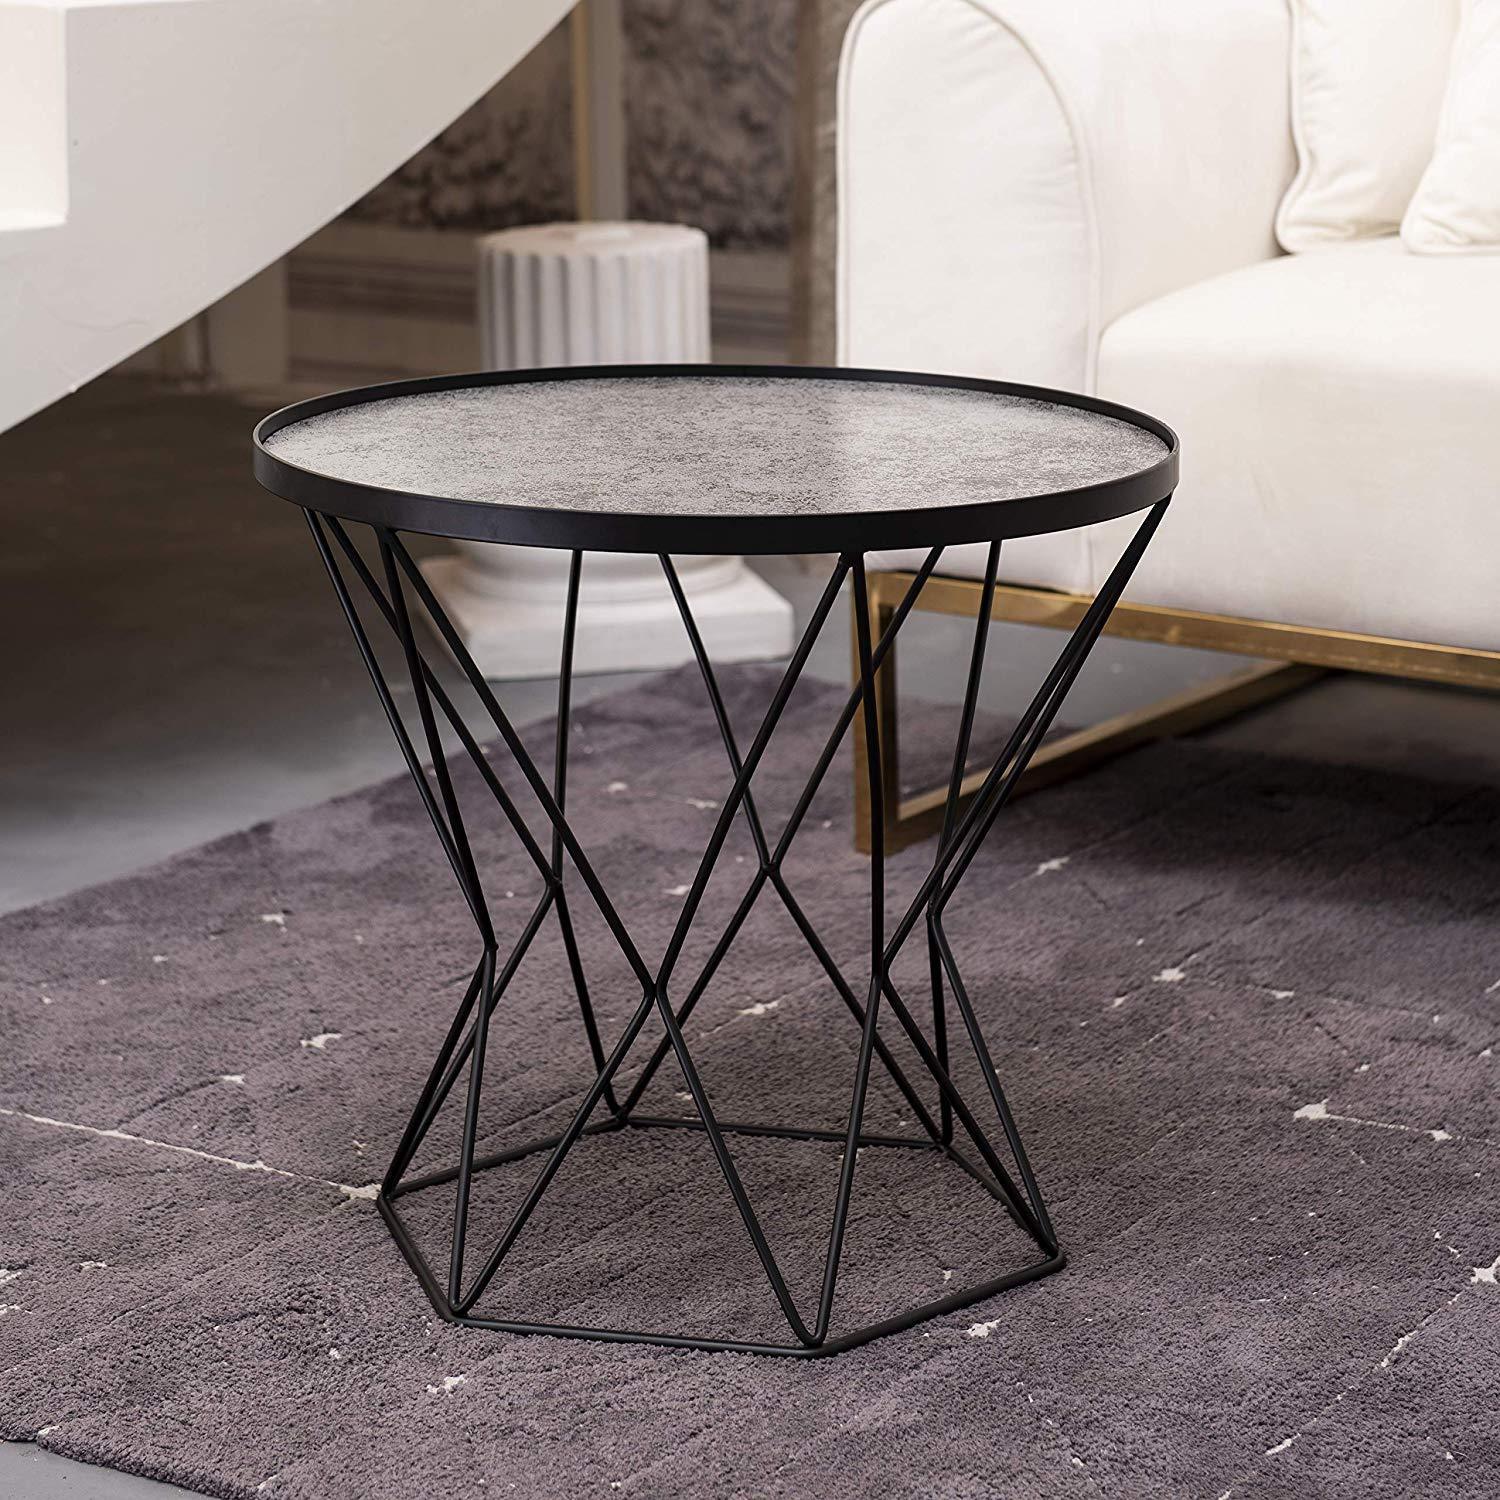 art leon small round end table modern glass top metal frame accent the stylish talbe just right for you which can meet most contemporary decor style this gorgerous placed not teak